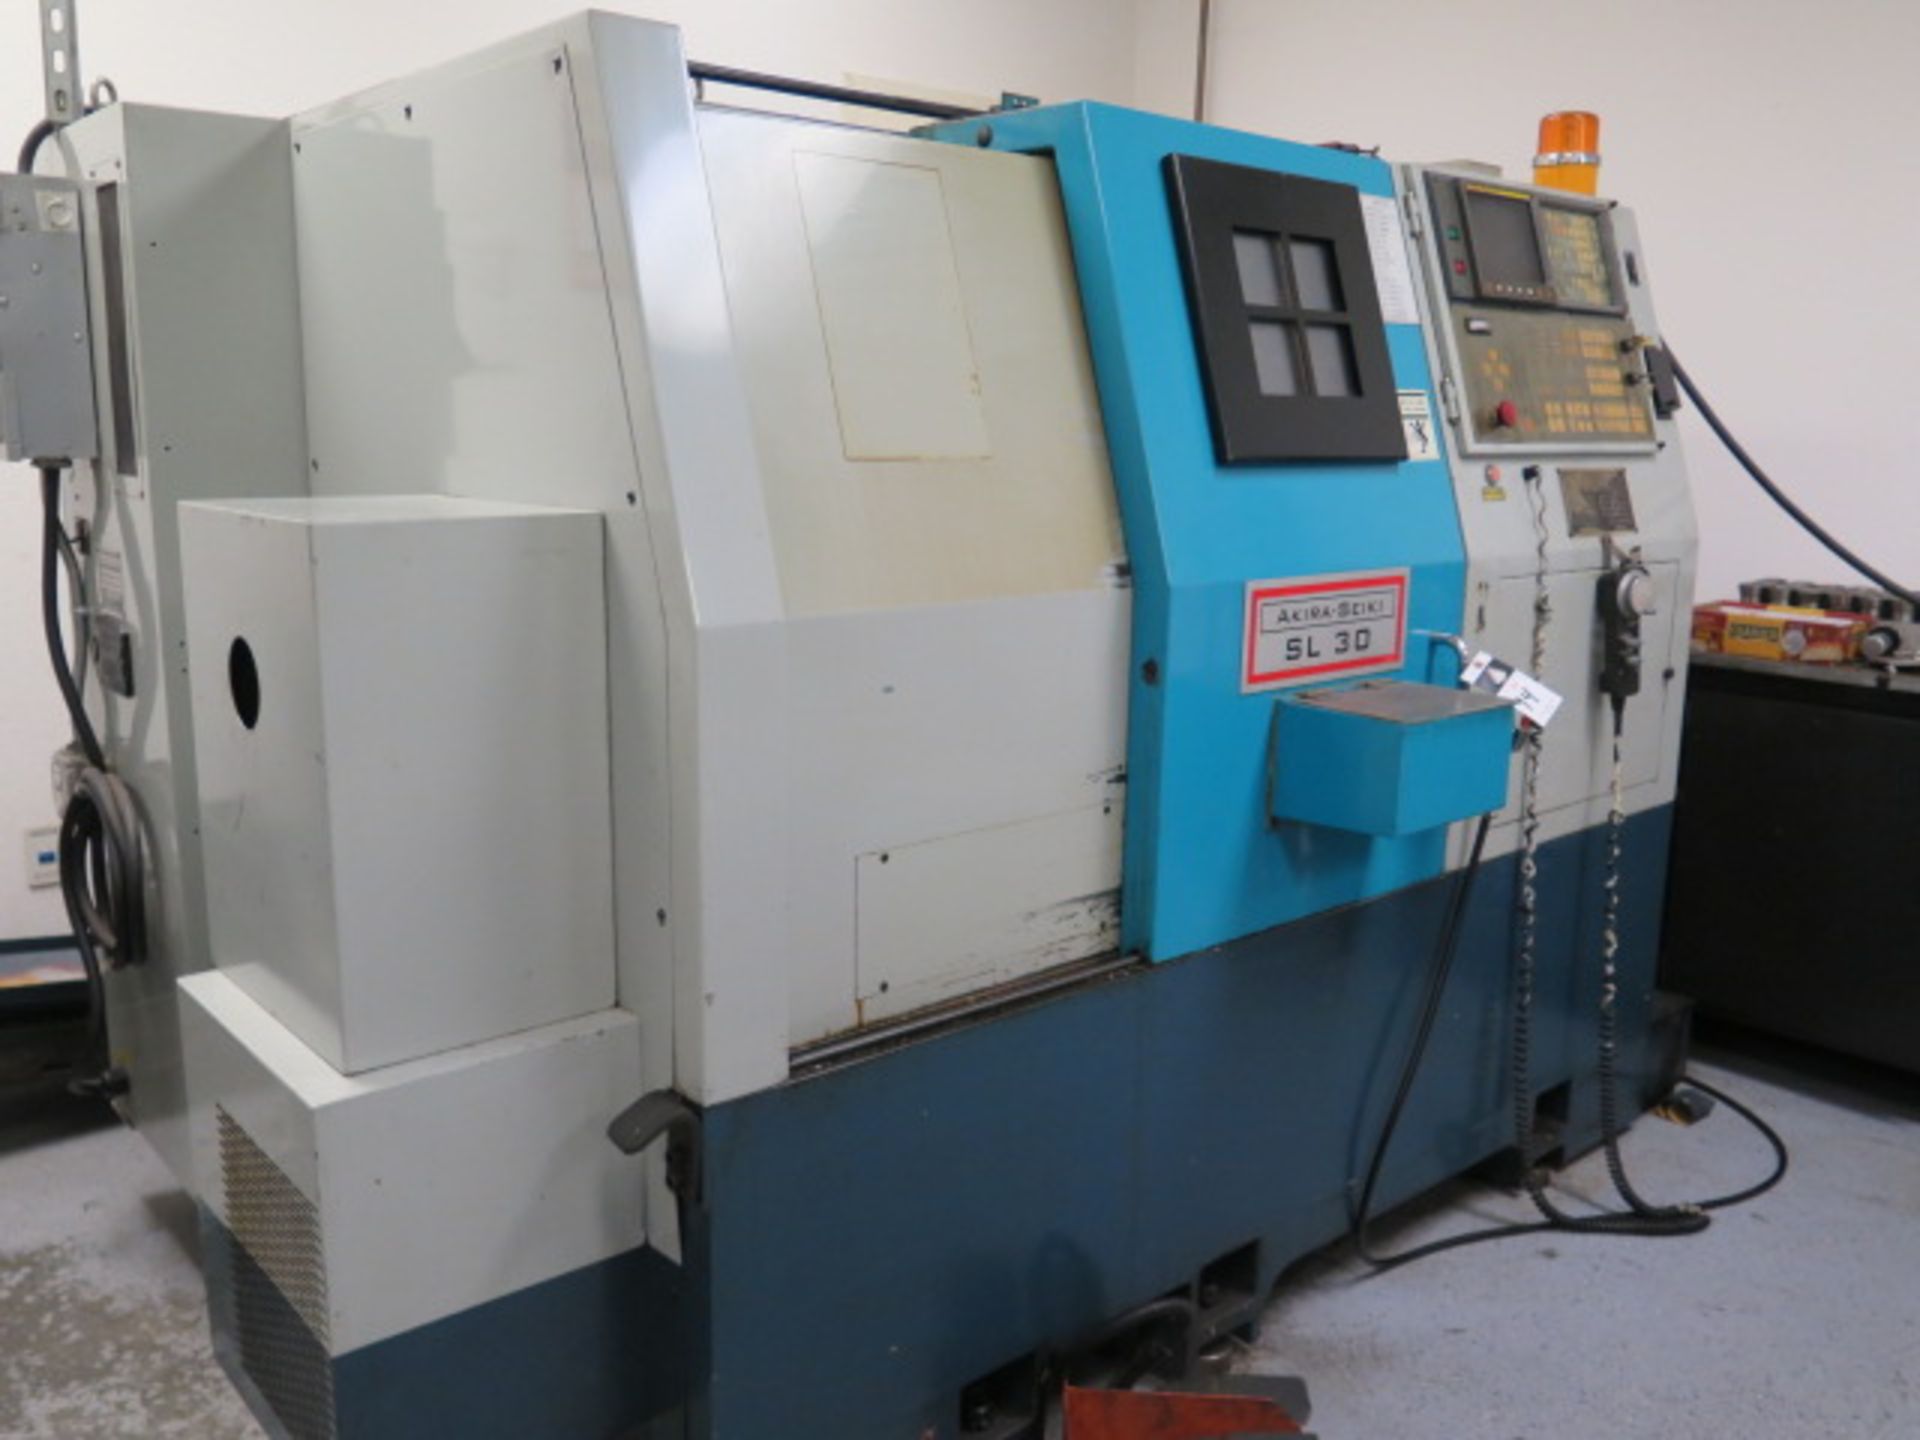 1999 Akira Seiki SL30 CNC Turning Center s/n 99TD105-056 w/ Fanuc Series 0-T Controls, SOLD AS IS - Image 3 of 14